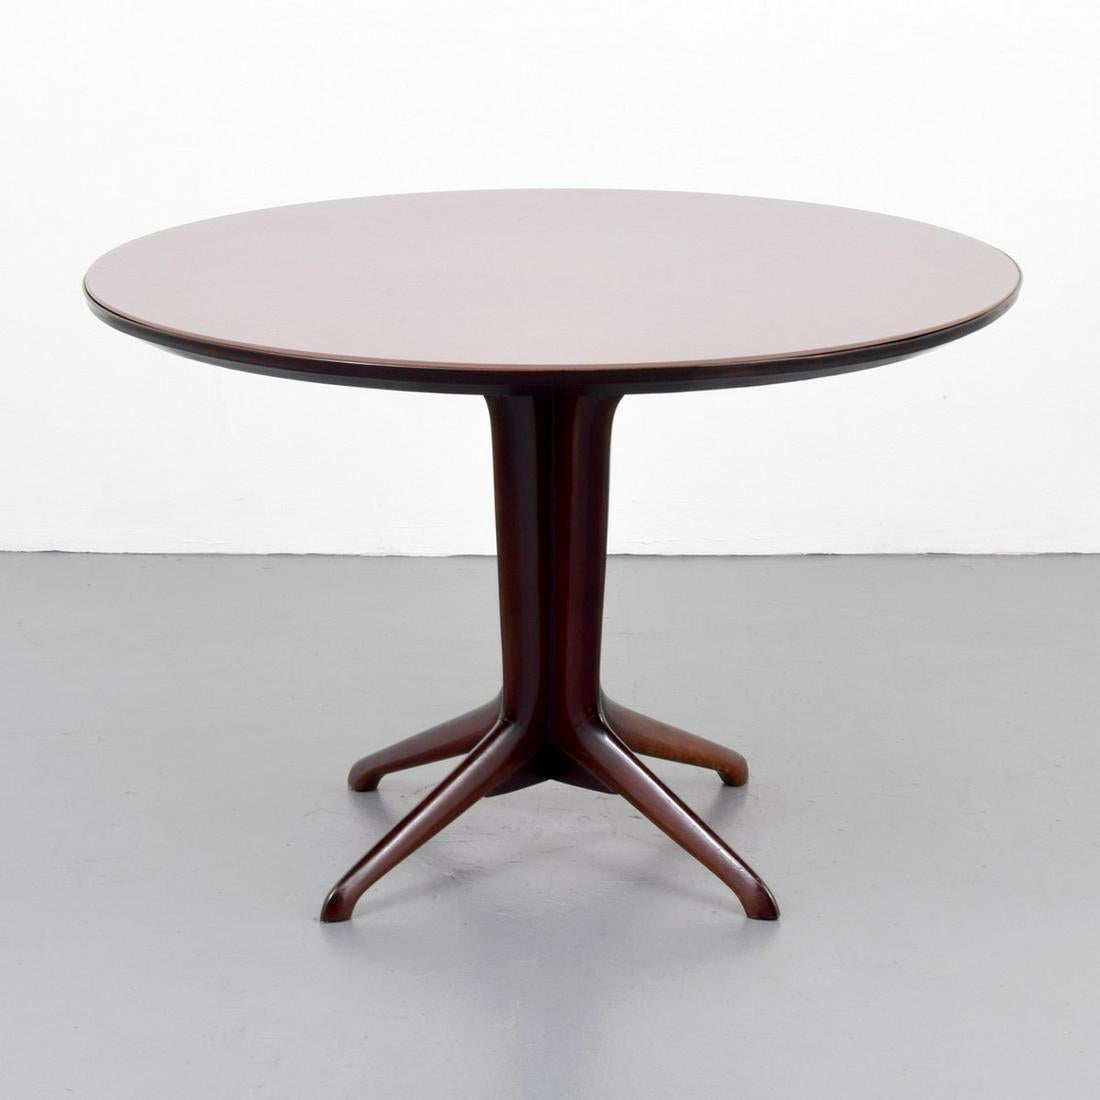 Round wooden dining table with glass top by Ico Parisi.